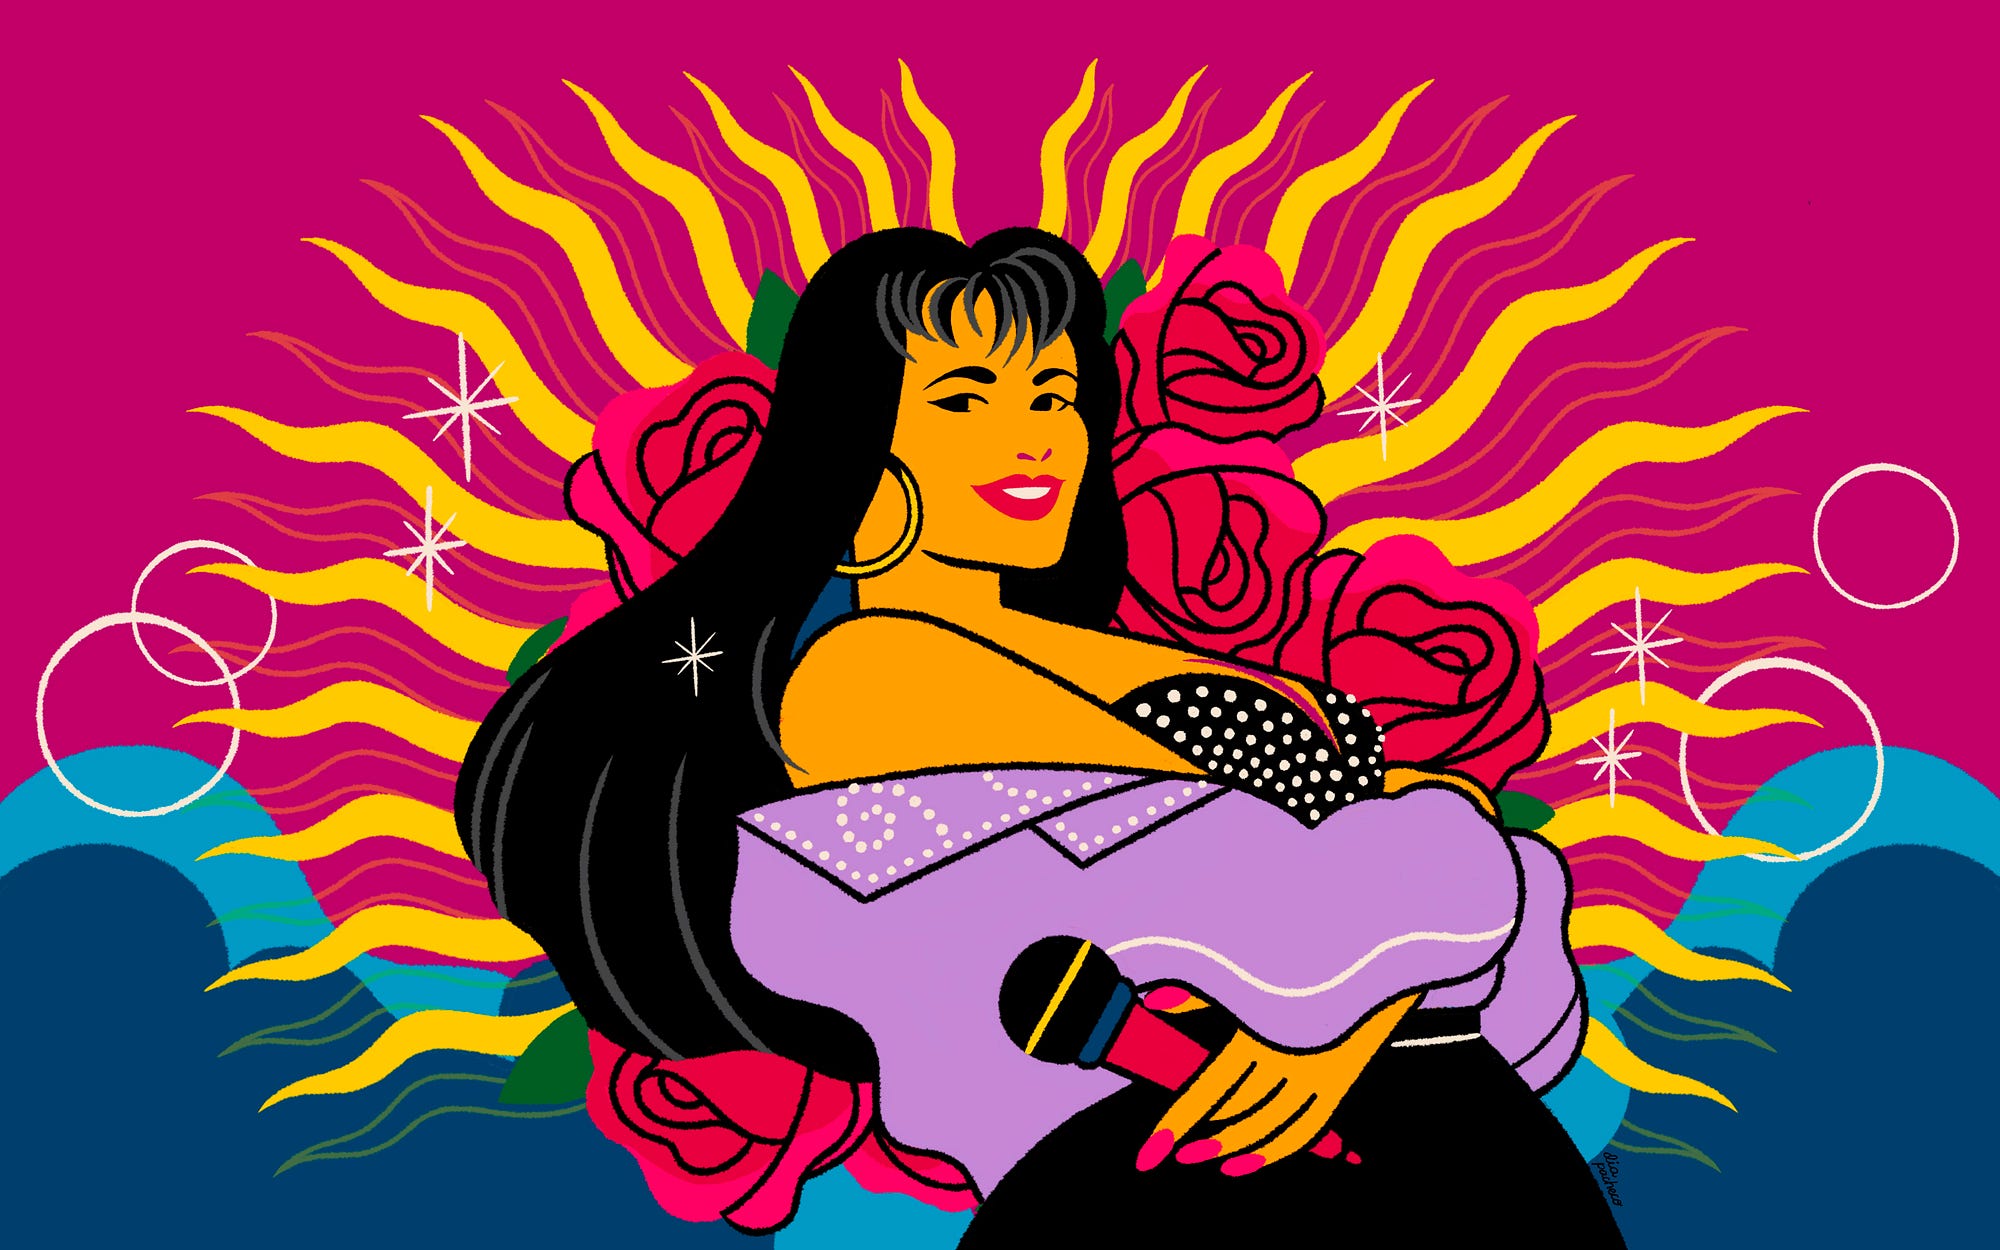 An illustration of Selena. She is posing in front of a sun and roses against a bold colorful background.